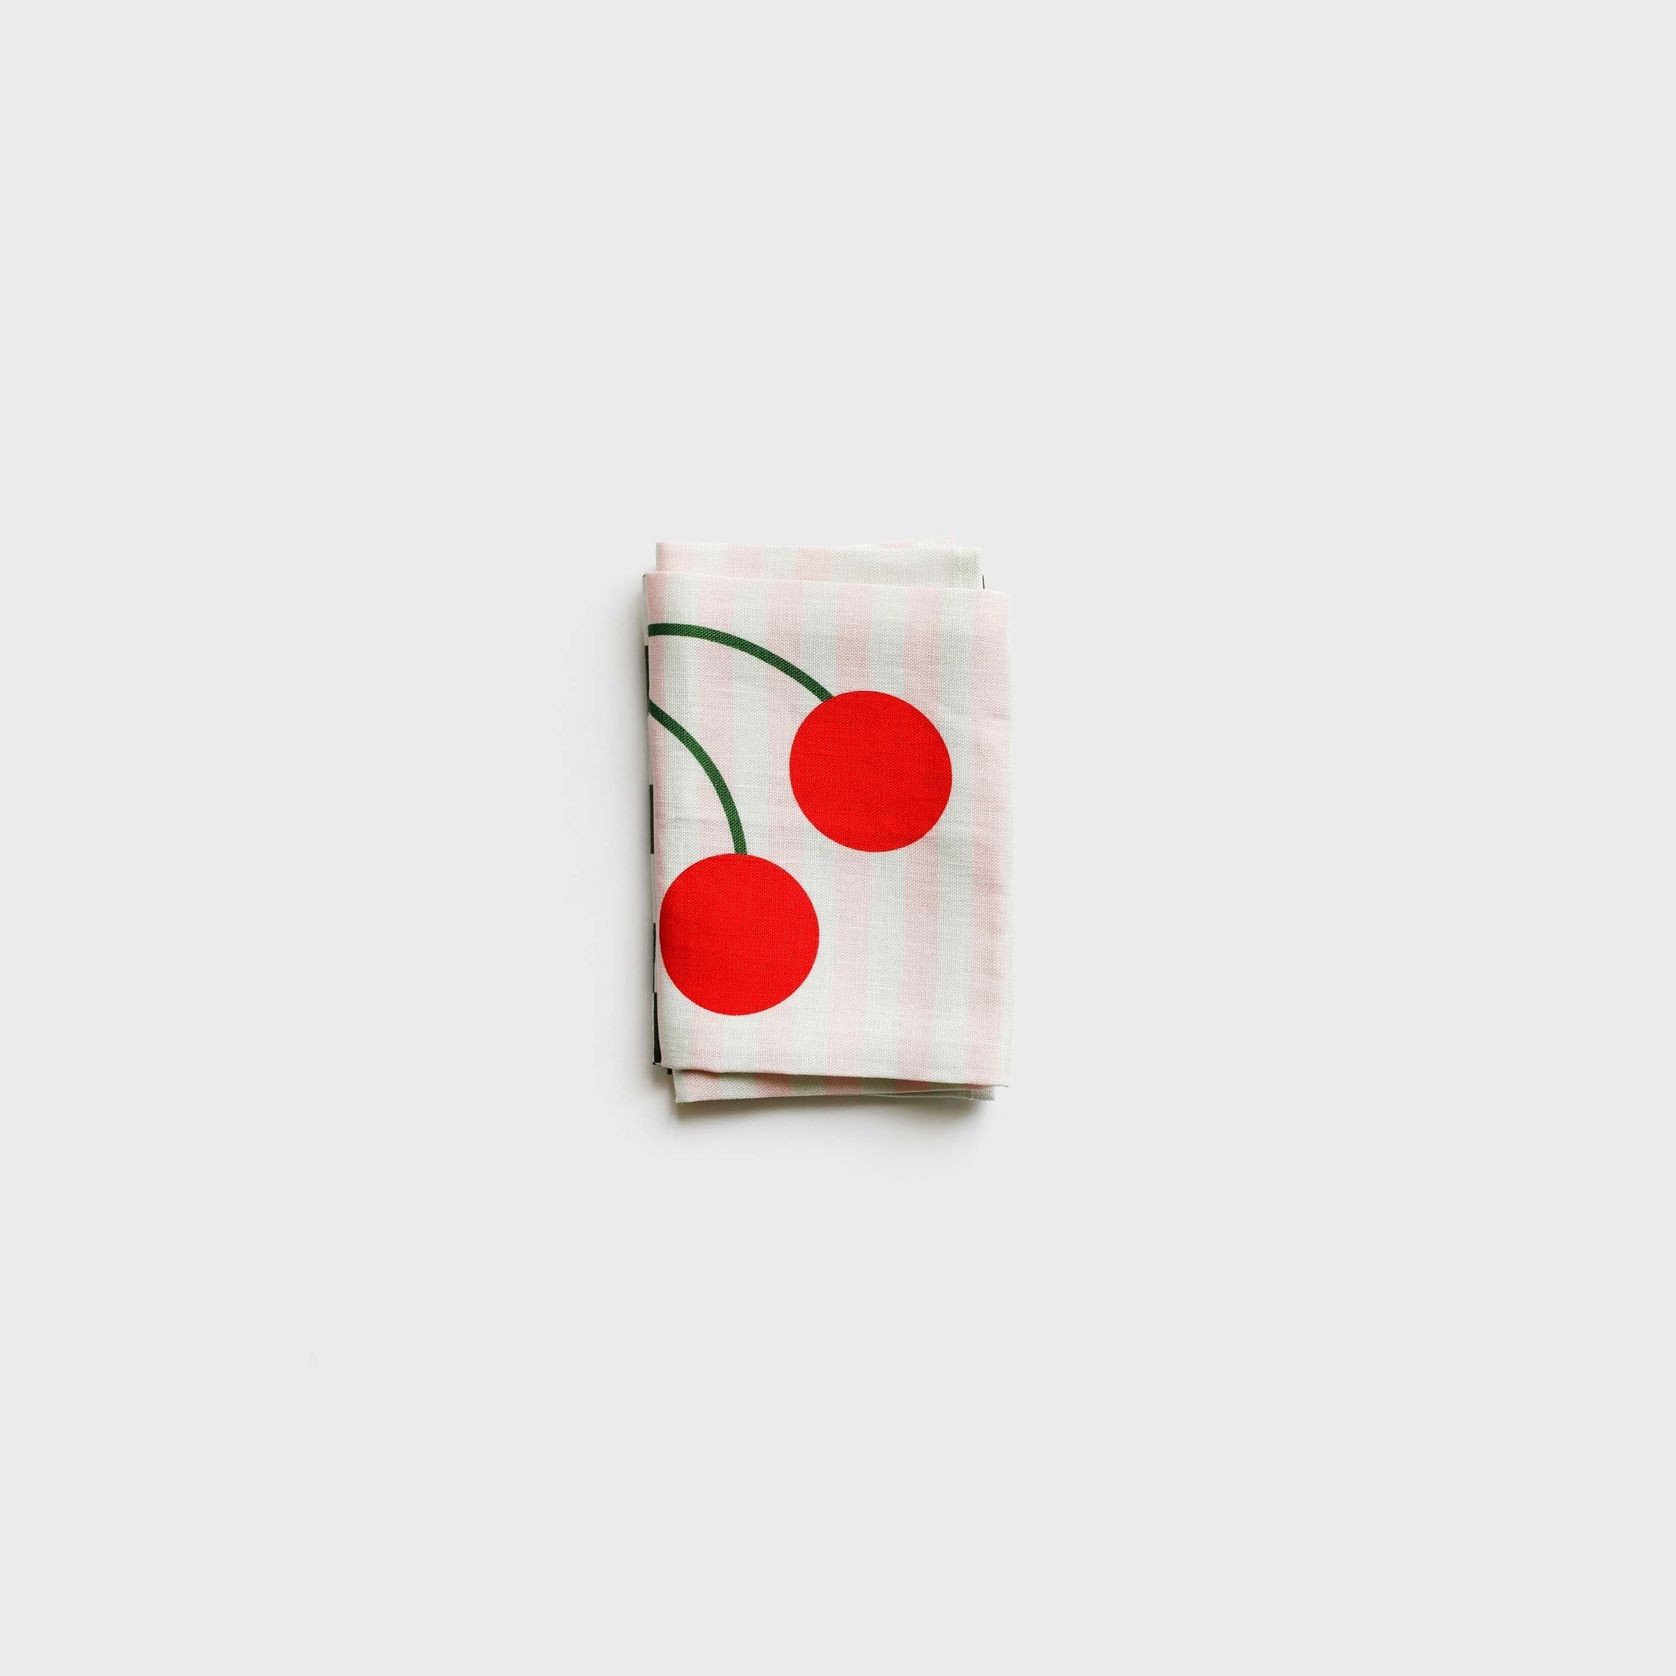 Cherry Printed Linen Tea towel by Lettuce | 100% Linen gallery detail image